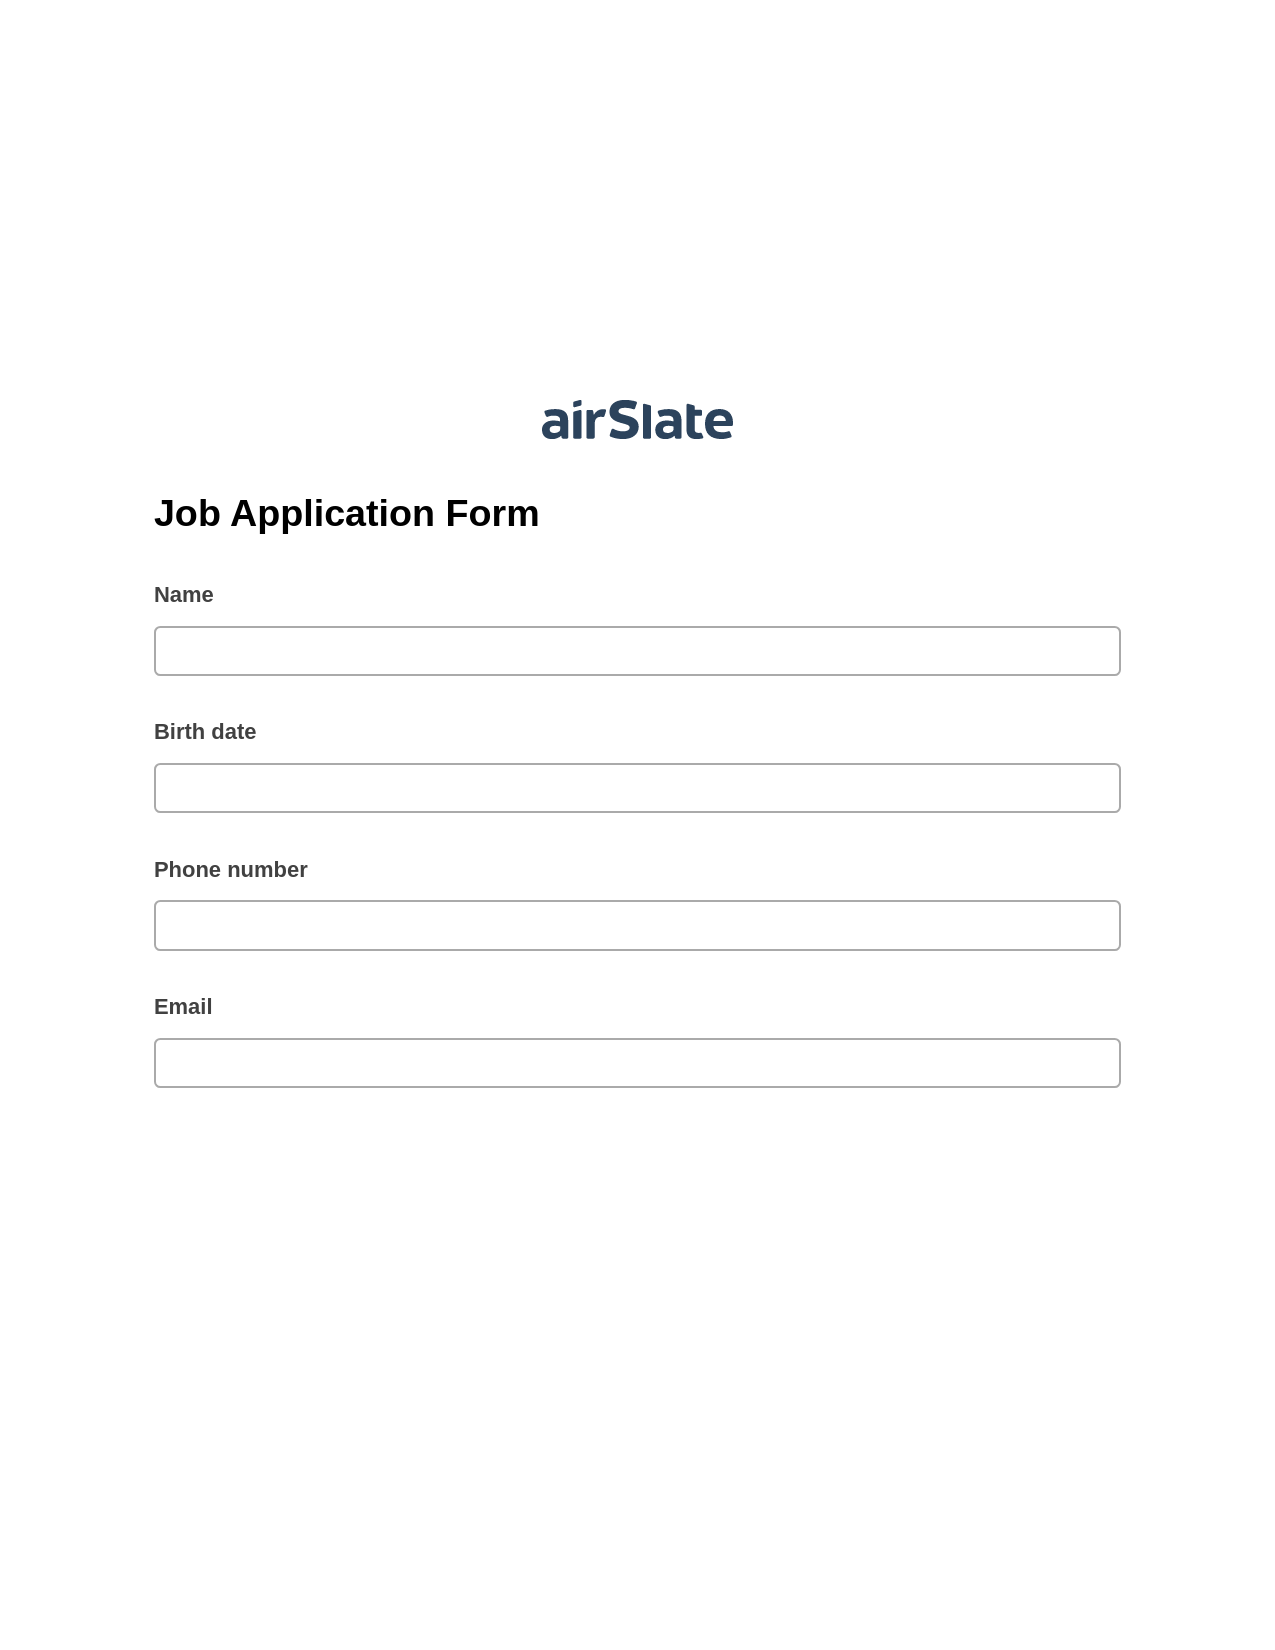 Multirole Job Application Form Pre-fill from Excel Spreadsheet Bot, Roles Reminder Bot, Export to MySQL Bot